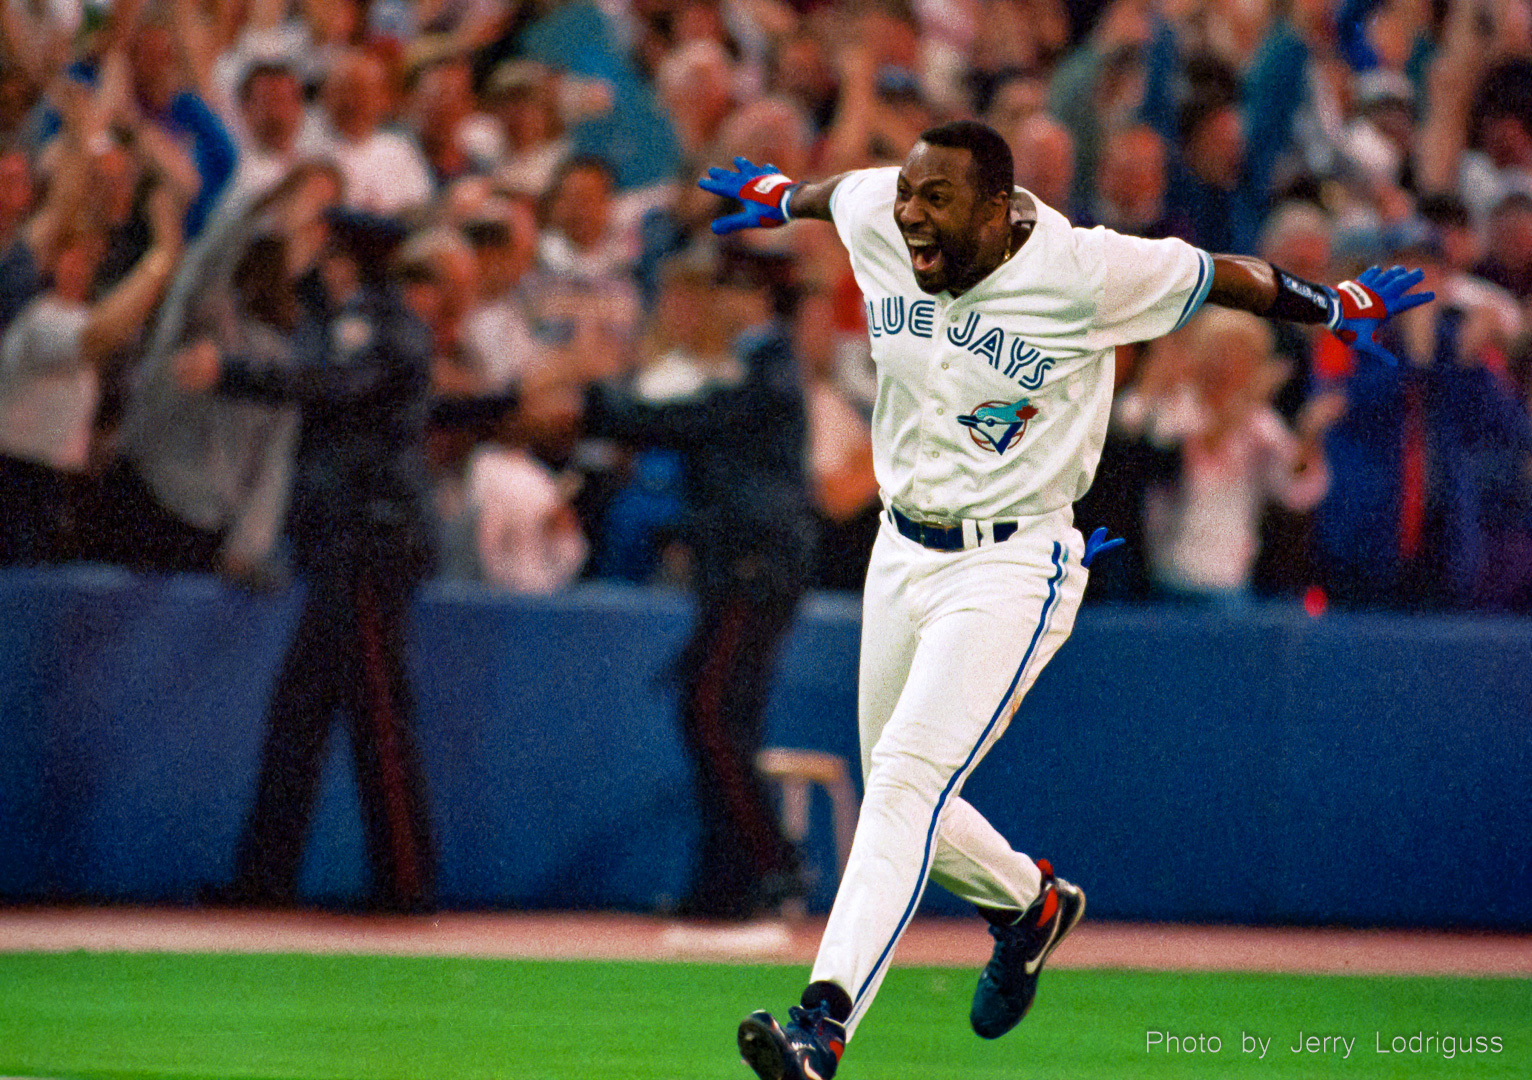 Toronto Blue Jays' Joe Carter celebrates on his way around the bases after hitting his game-winning, three-run home run in the bottom of the ninth to win the 1993 World Series.